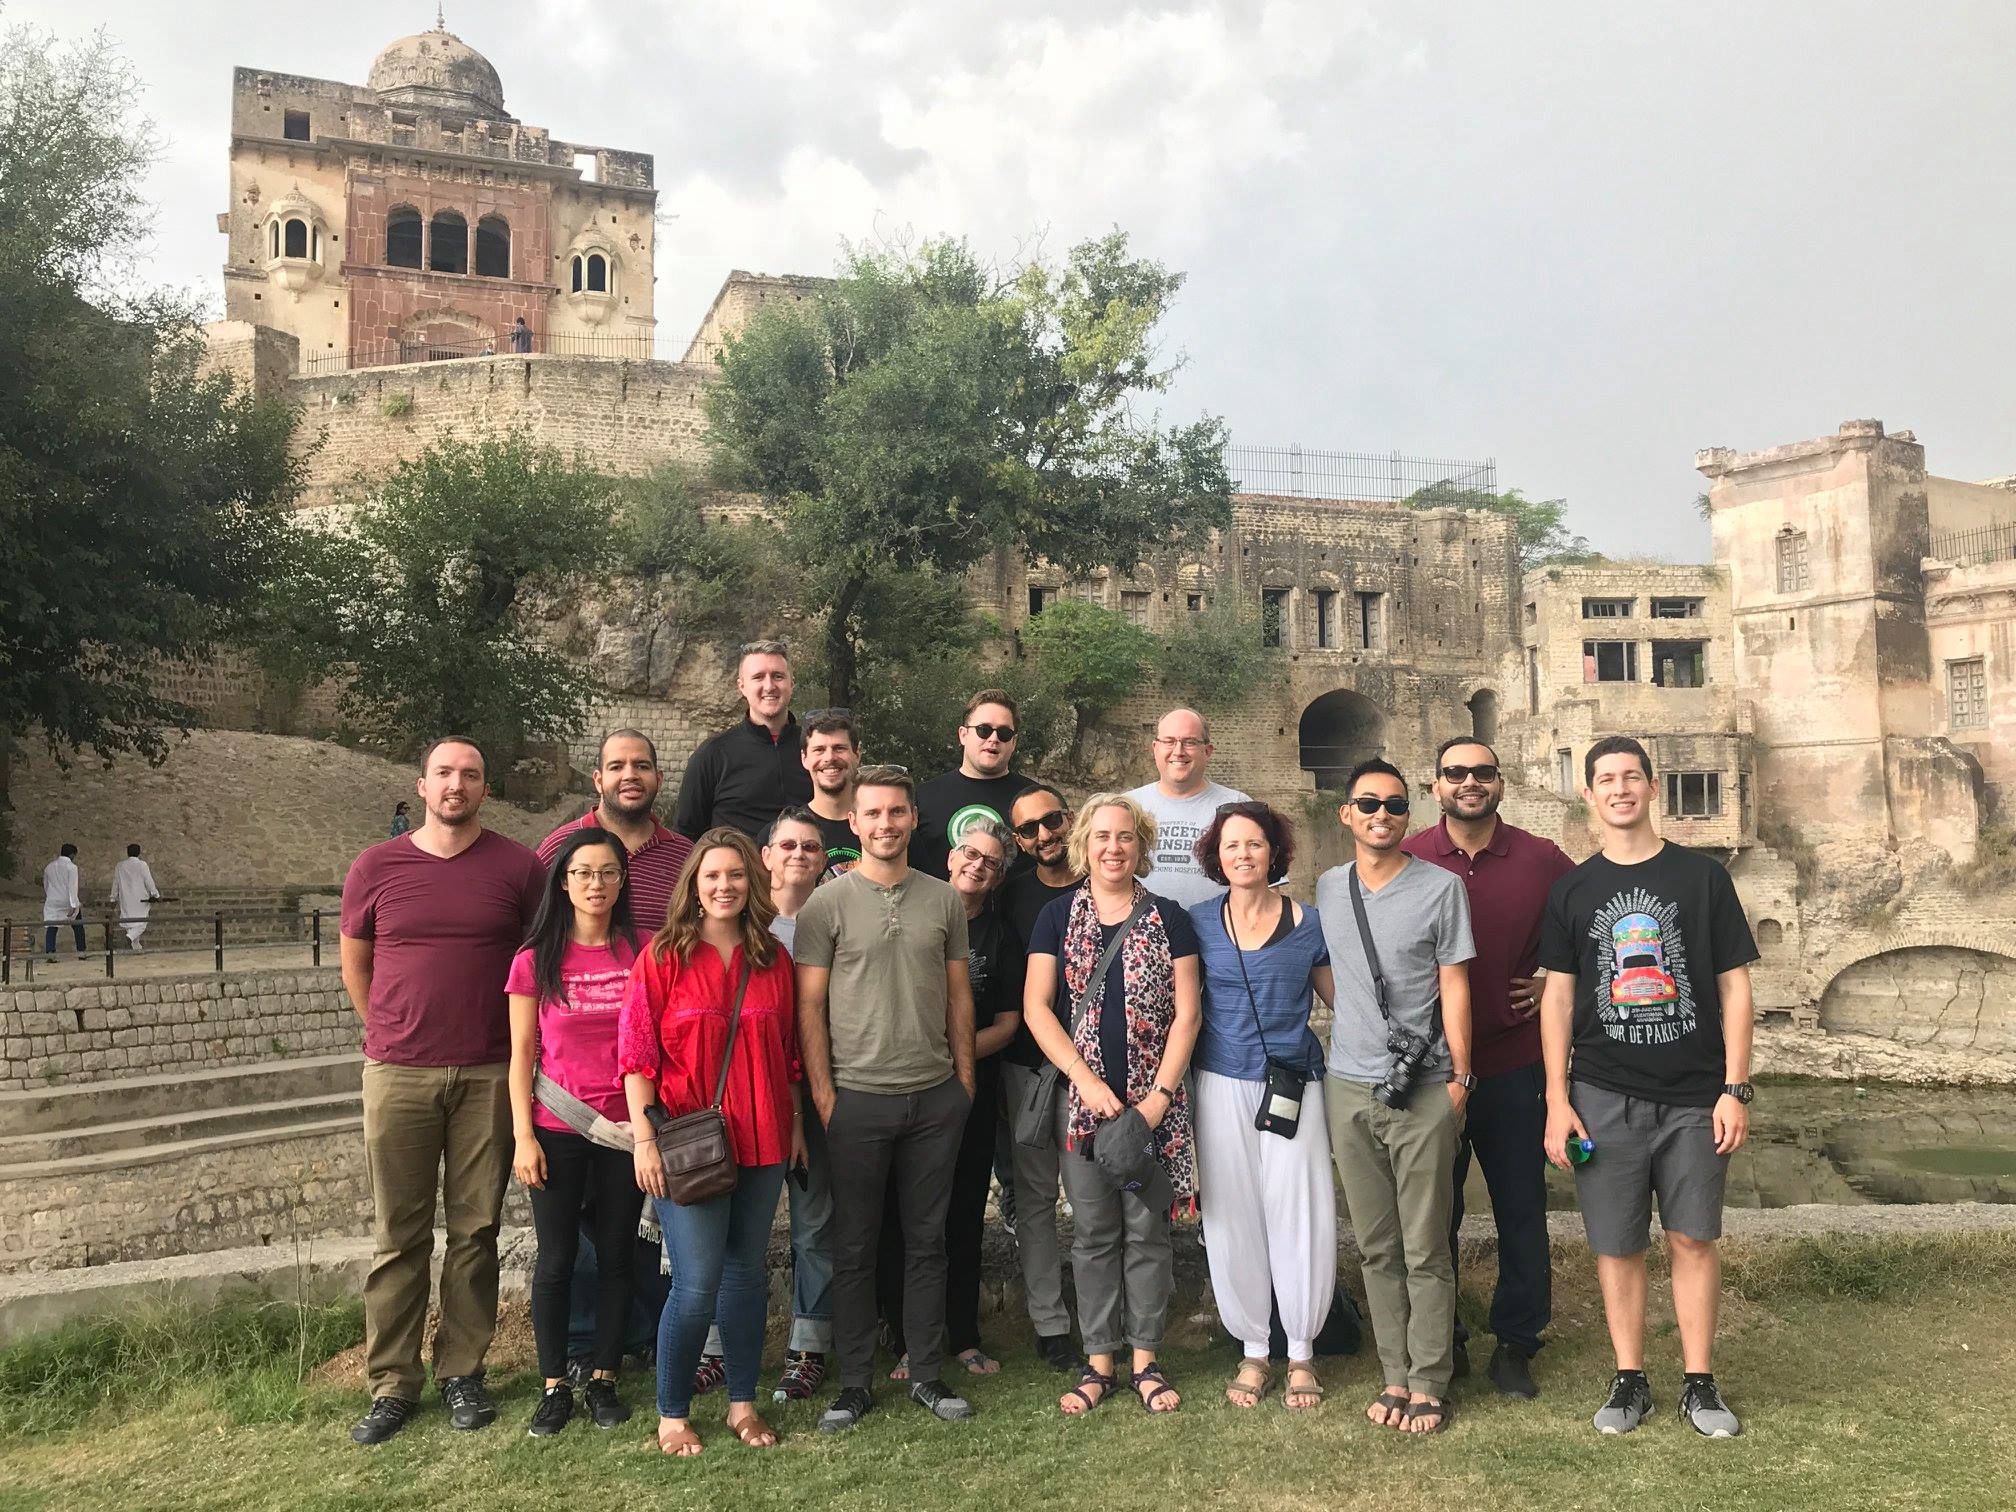 The reps visiting Katas Raj temple, a historial site, enroute from Islamabad to Lahore